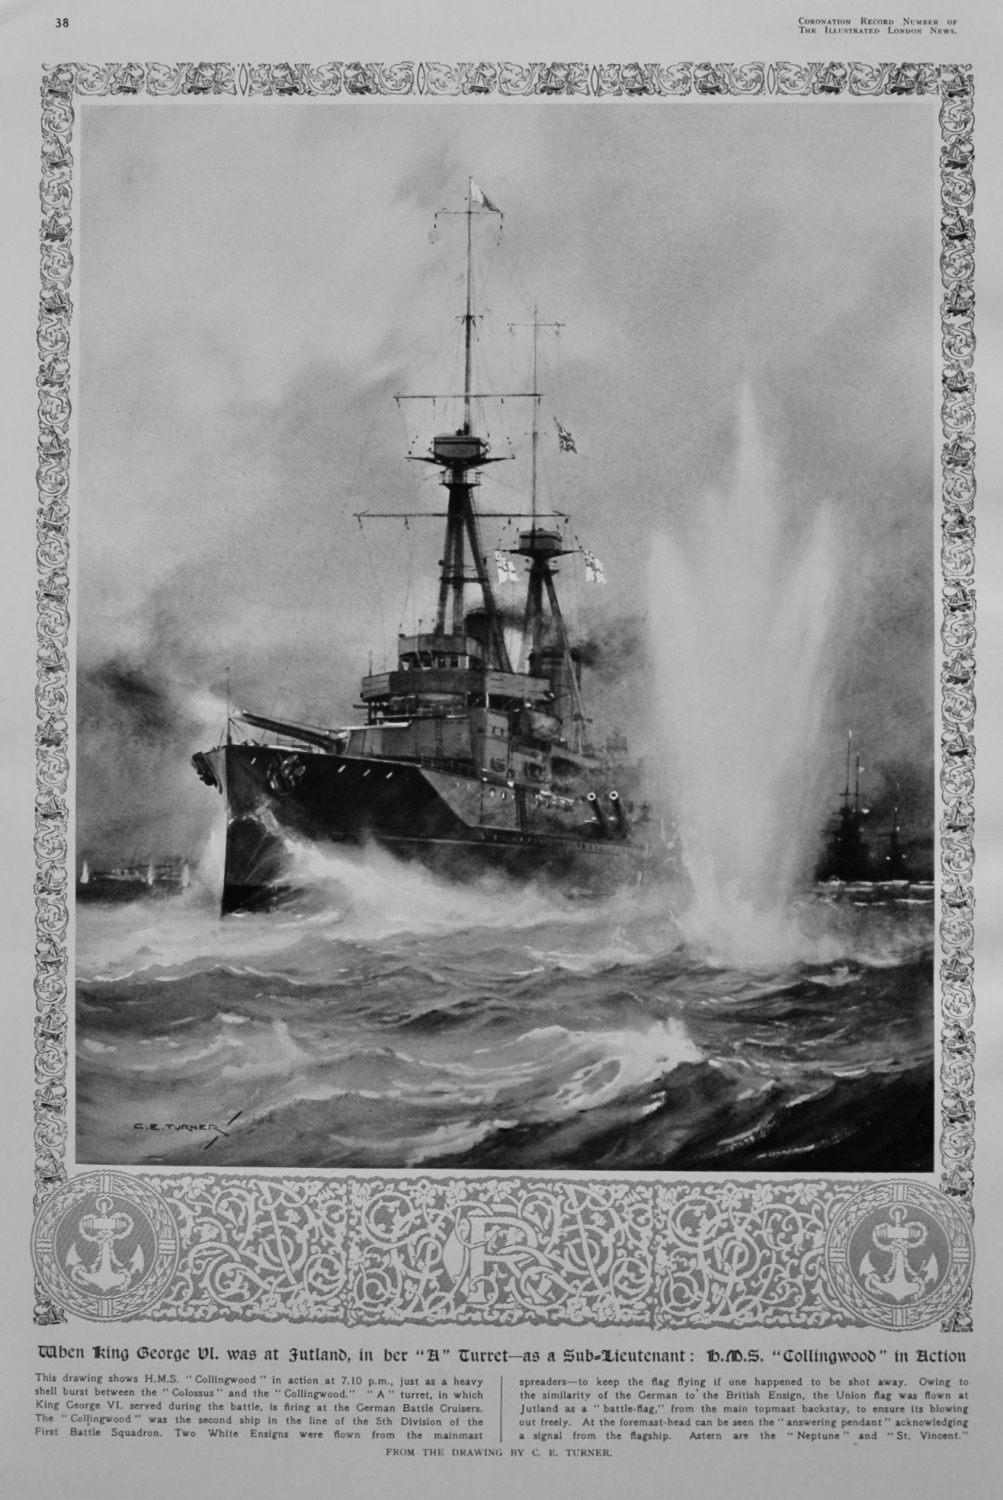 When King George VI. was at Jutland, in her 